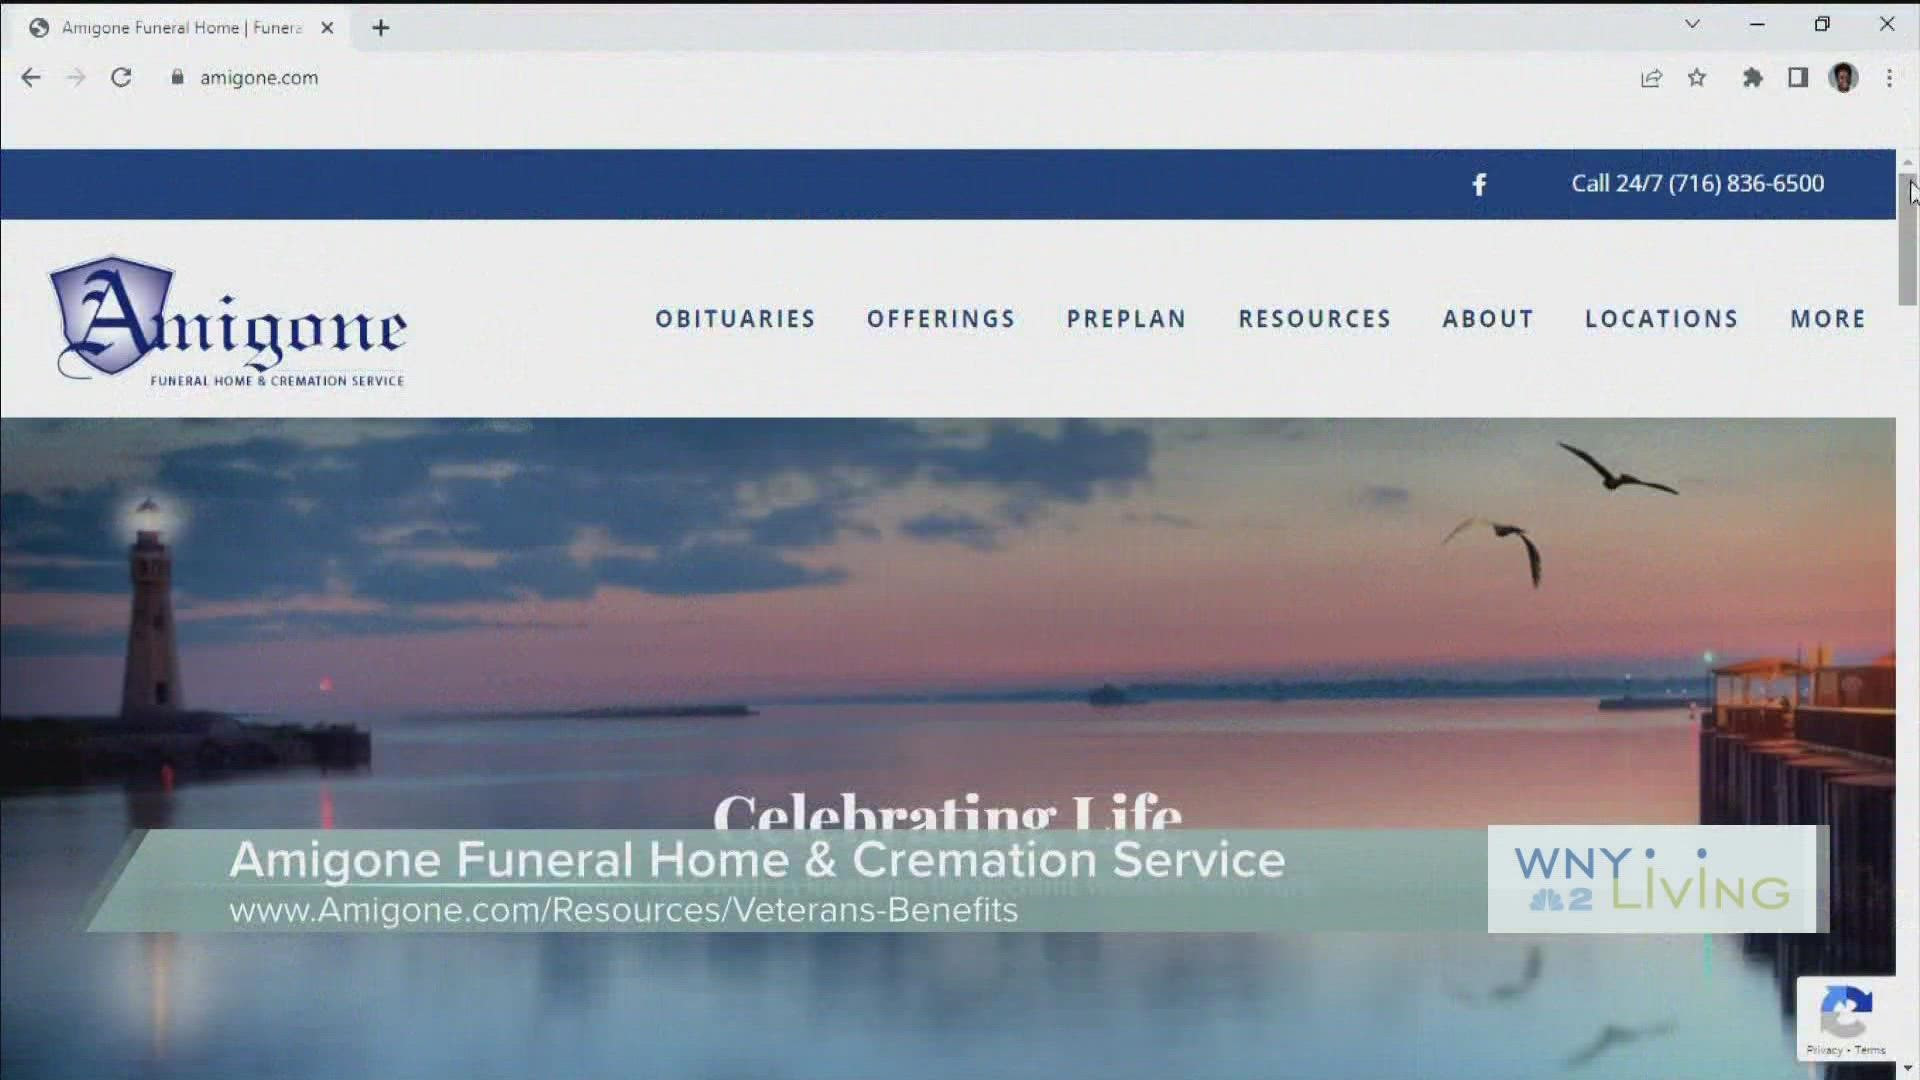 WNY Living - November 12 - Amigone Funeral Home & Cremation Service (THIS VIDEO IS SPONSORED BY AMIGONE FUNERAL HOME & CREMATION SERVICE)